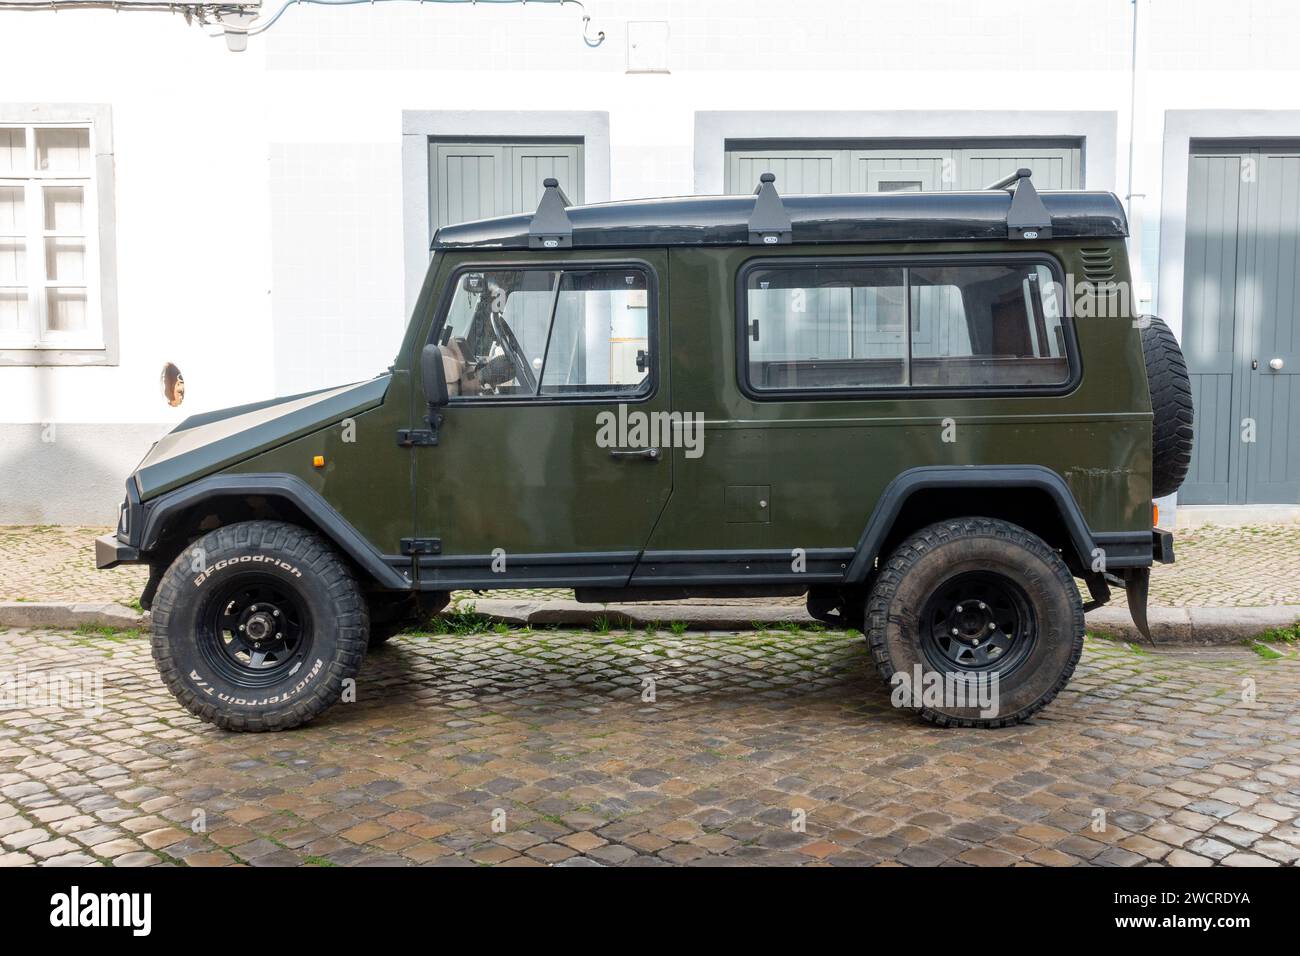 A  Portuguese SUV Vehicle UMM 4X4 Vehicle Made By União Metalo-Mecânica In Portugal Off Road Vehicle Stock Photo